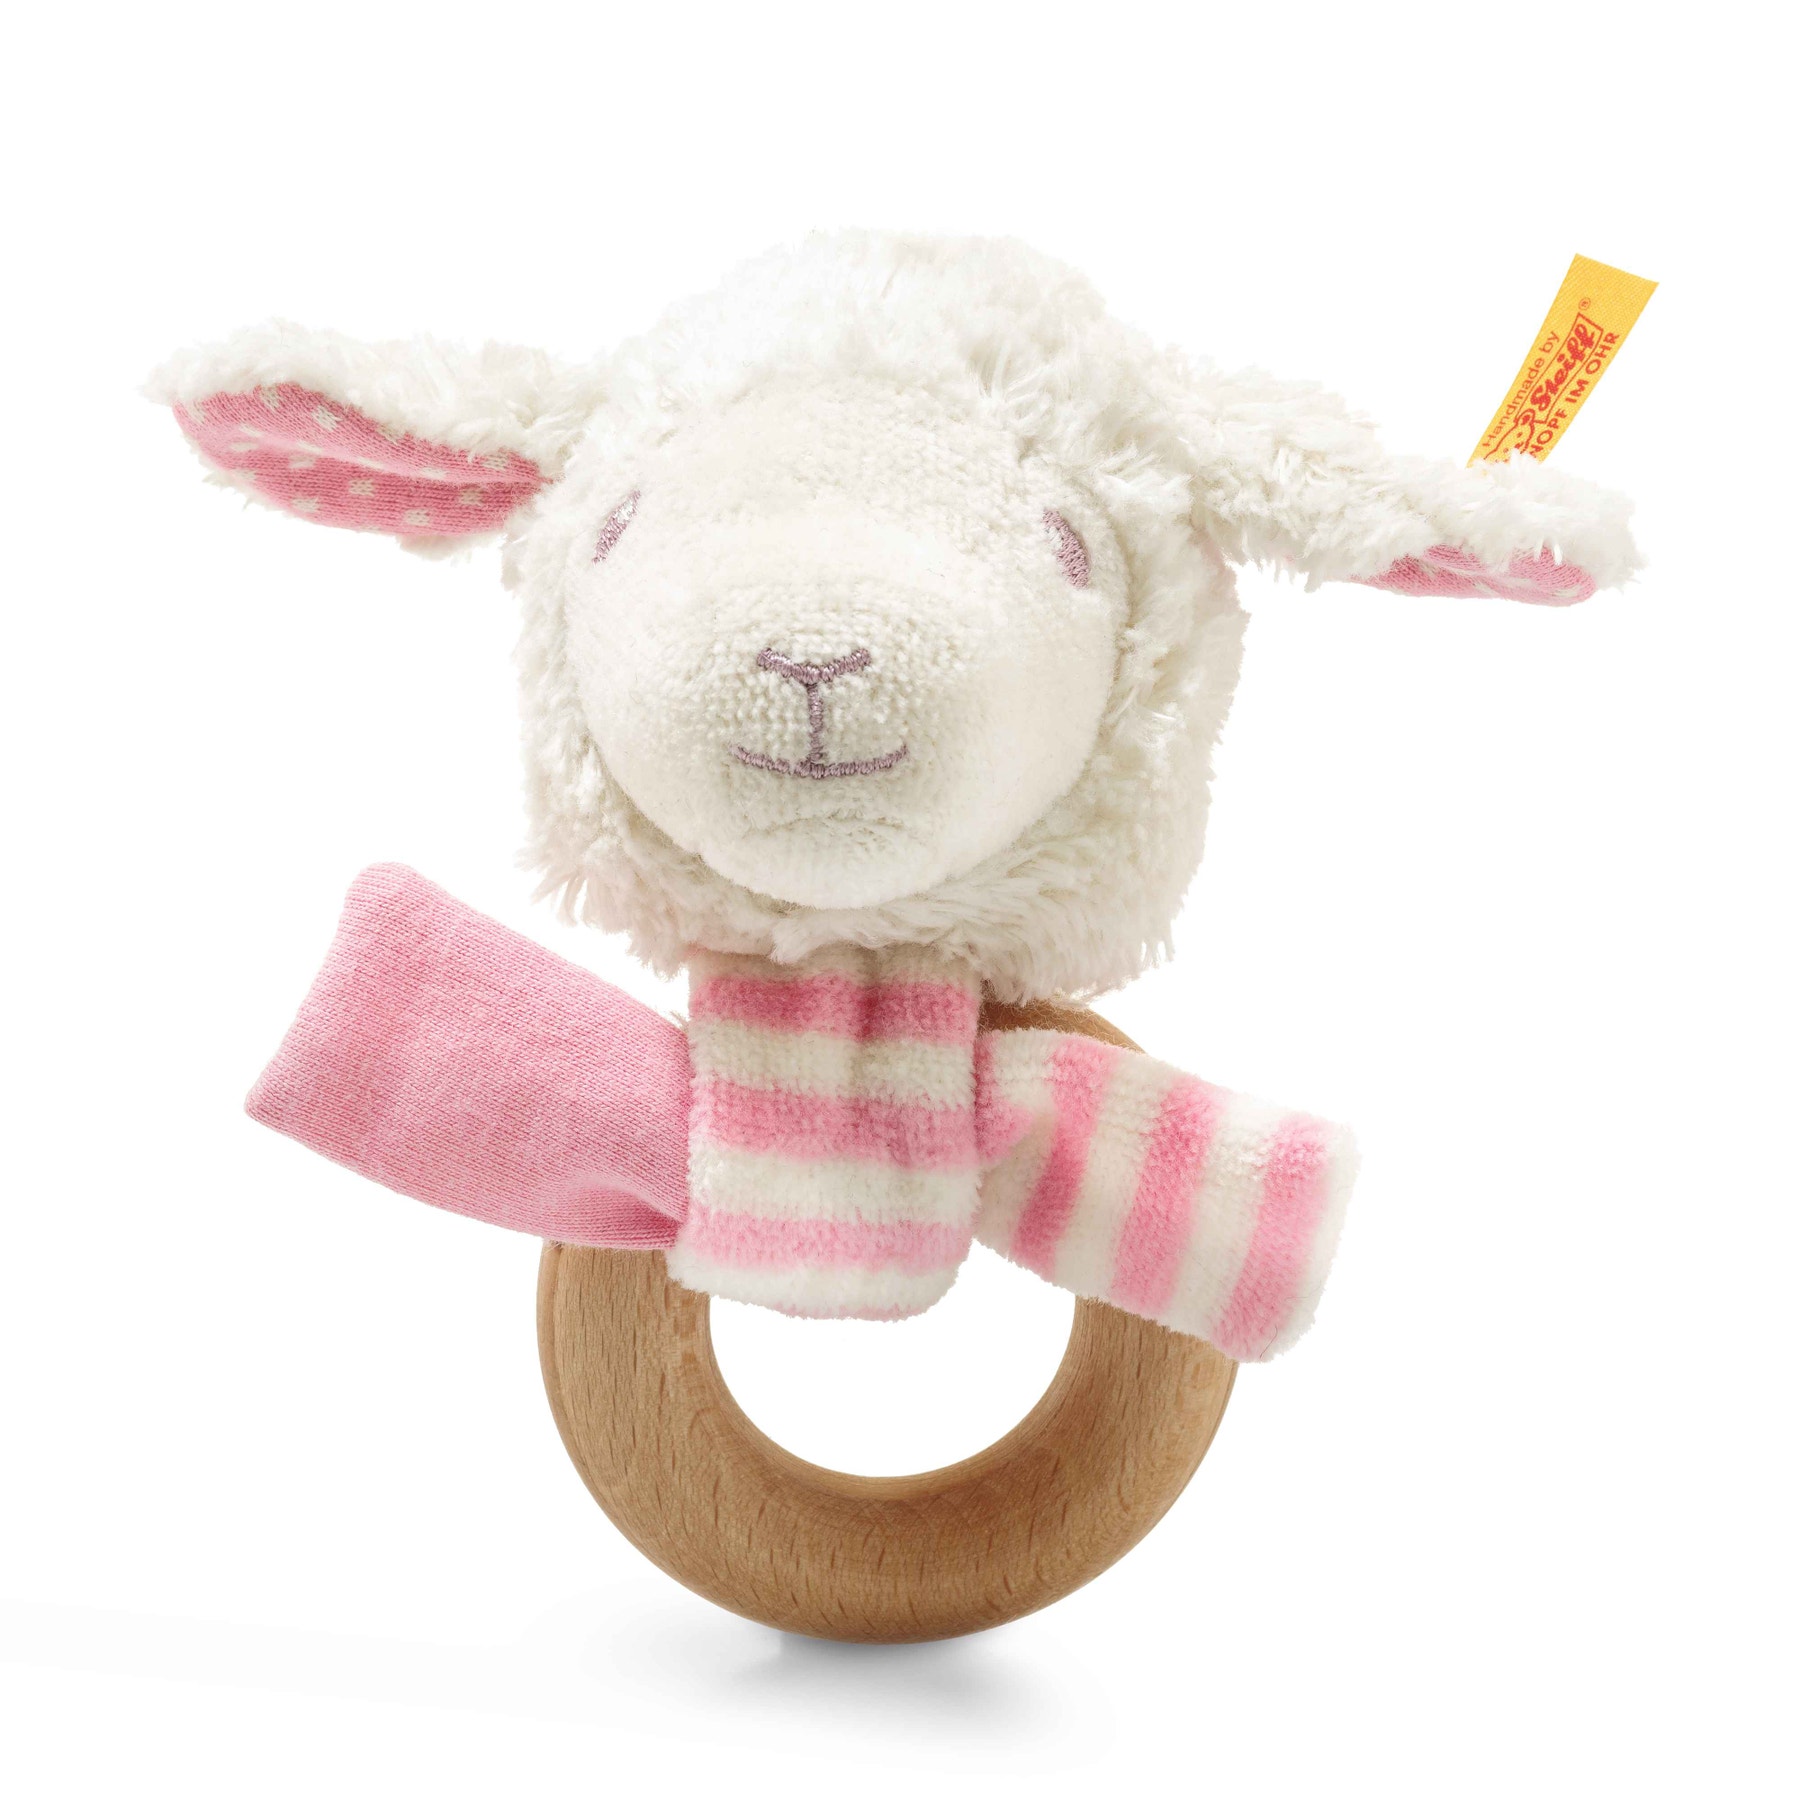 Liena lambgrip toy with rattle